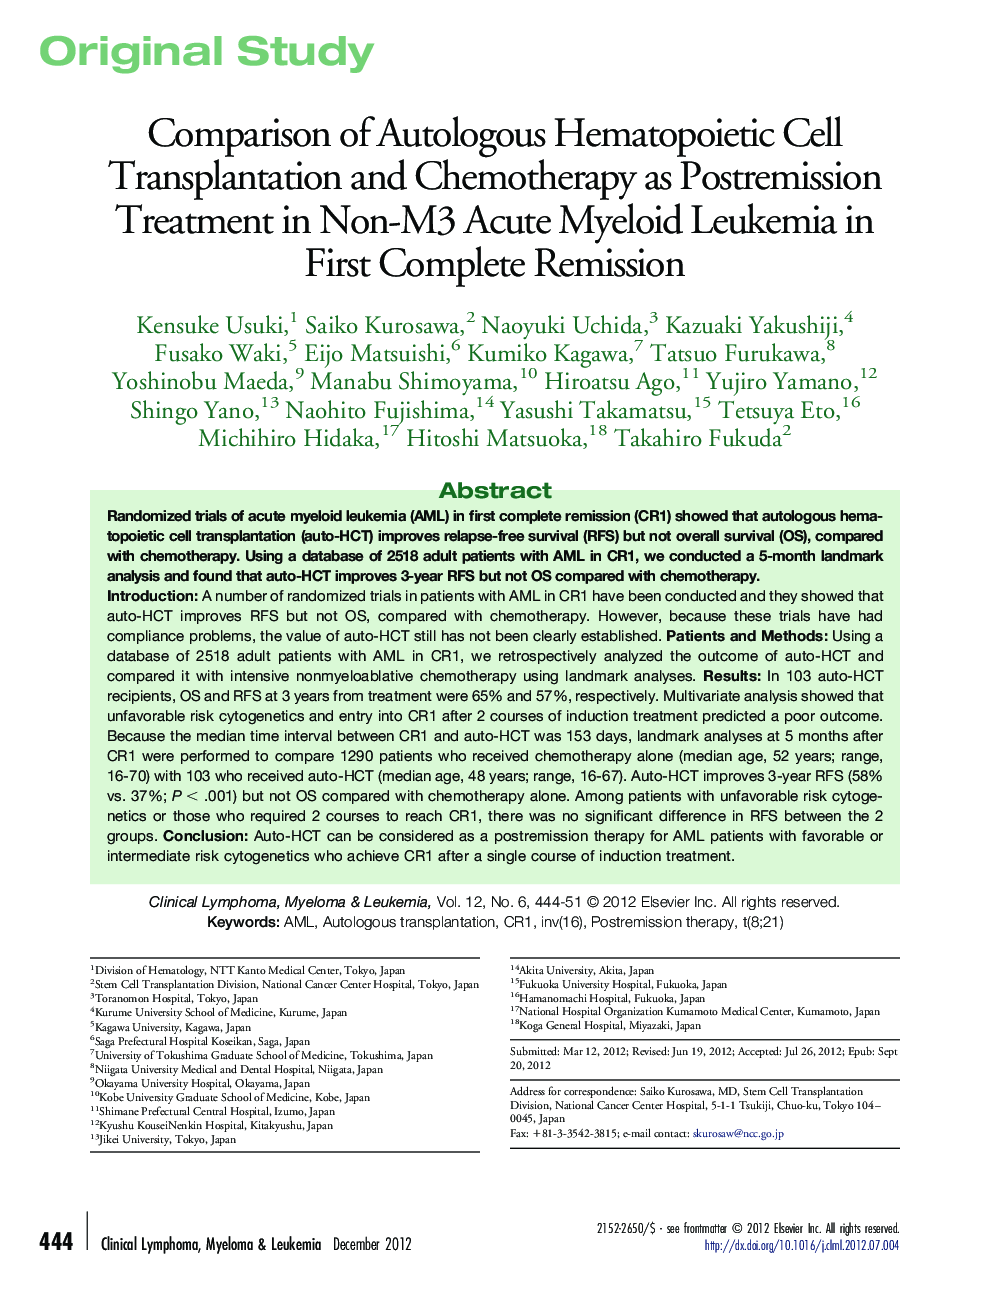 Comparison of Autologous Hematopoietic Cell Transplantation and Chemotherapy as Postremission Treatment in Non-M3 Acute Myeloid Leukemia in First Complete Remission